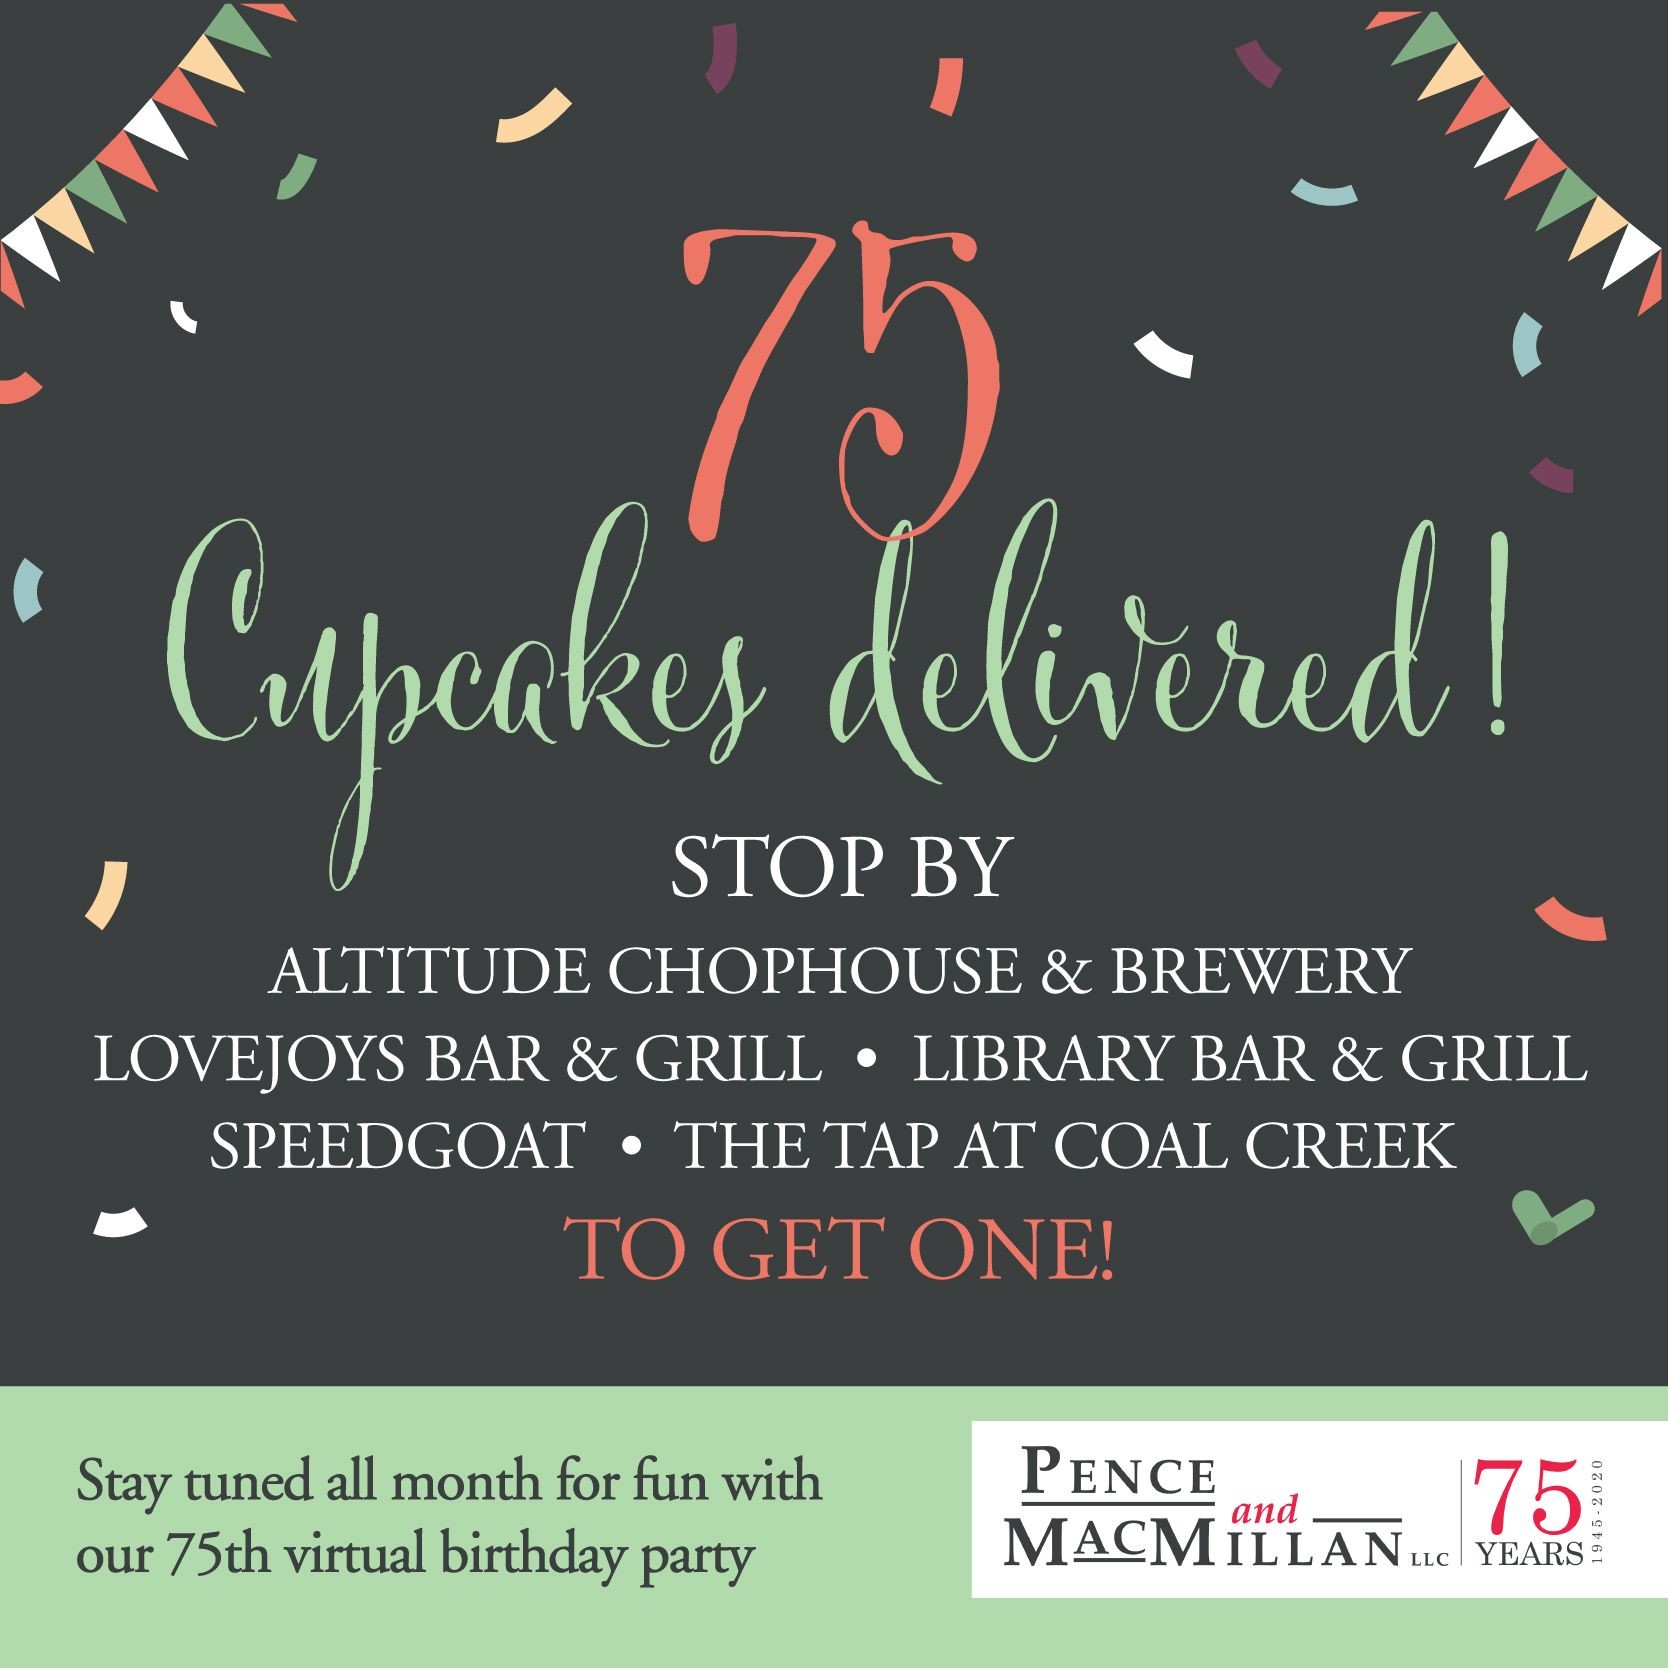 75 cupcakes delivered! Stop by Altitude Chophouse & Brewery, Lovejoys Bar & Grill, Library Bar & Grill, Speedgoat, The Tap at Coal Creek to get one! Stay tuned all month for fun with our 75th virtual birthday party.